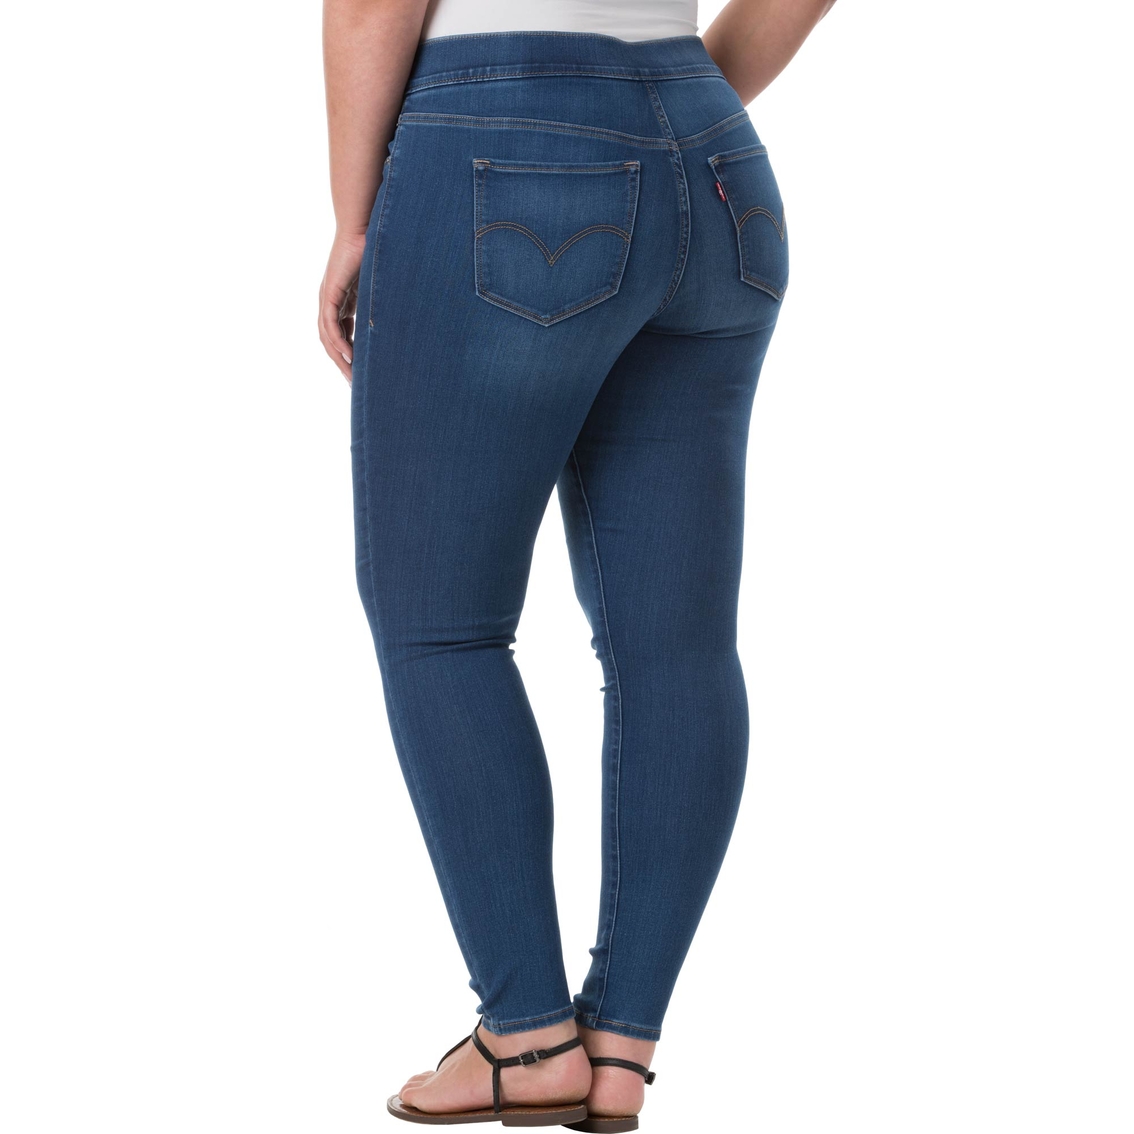 Levi's Plus Size Perfectly Slimming Pull On Skinny Jeans | Jeans ...